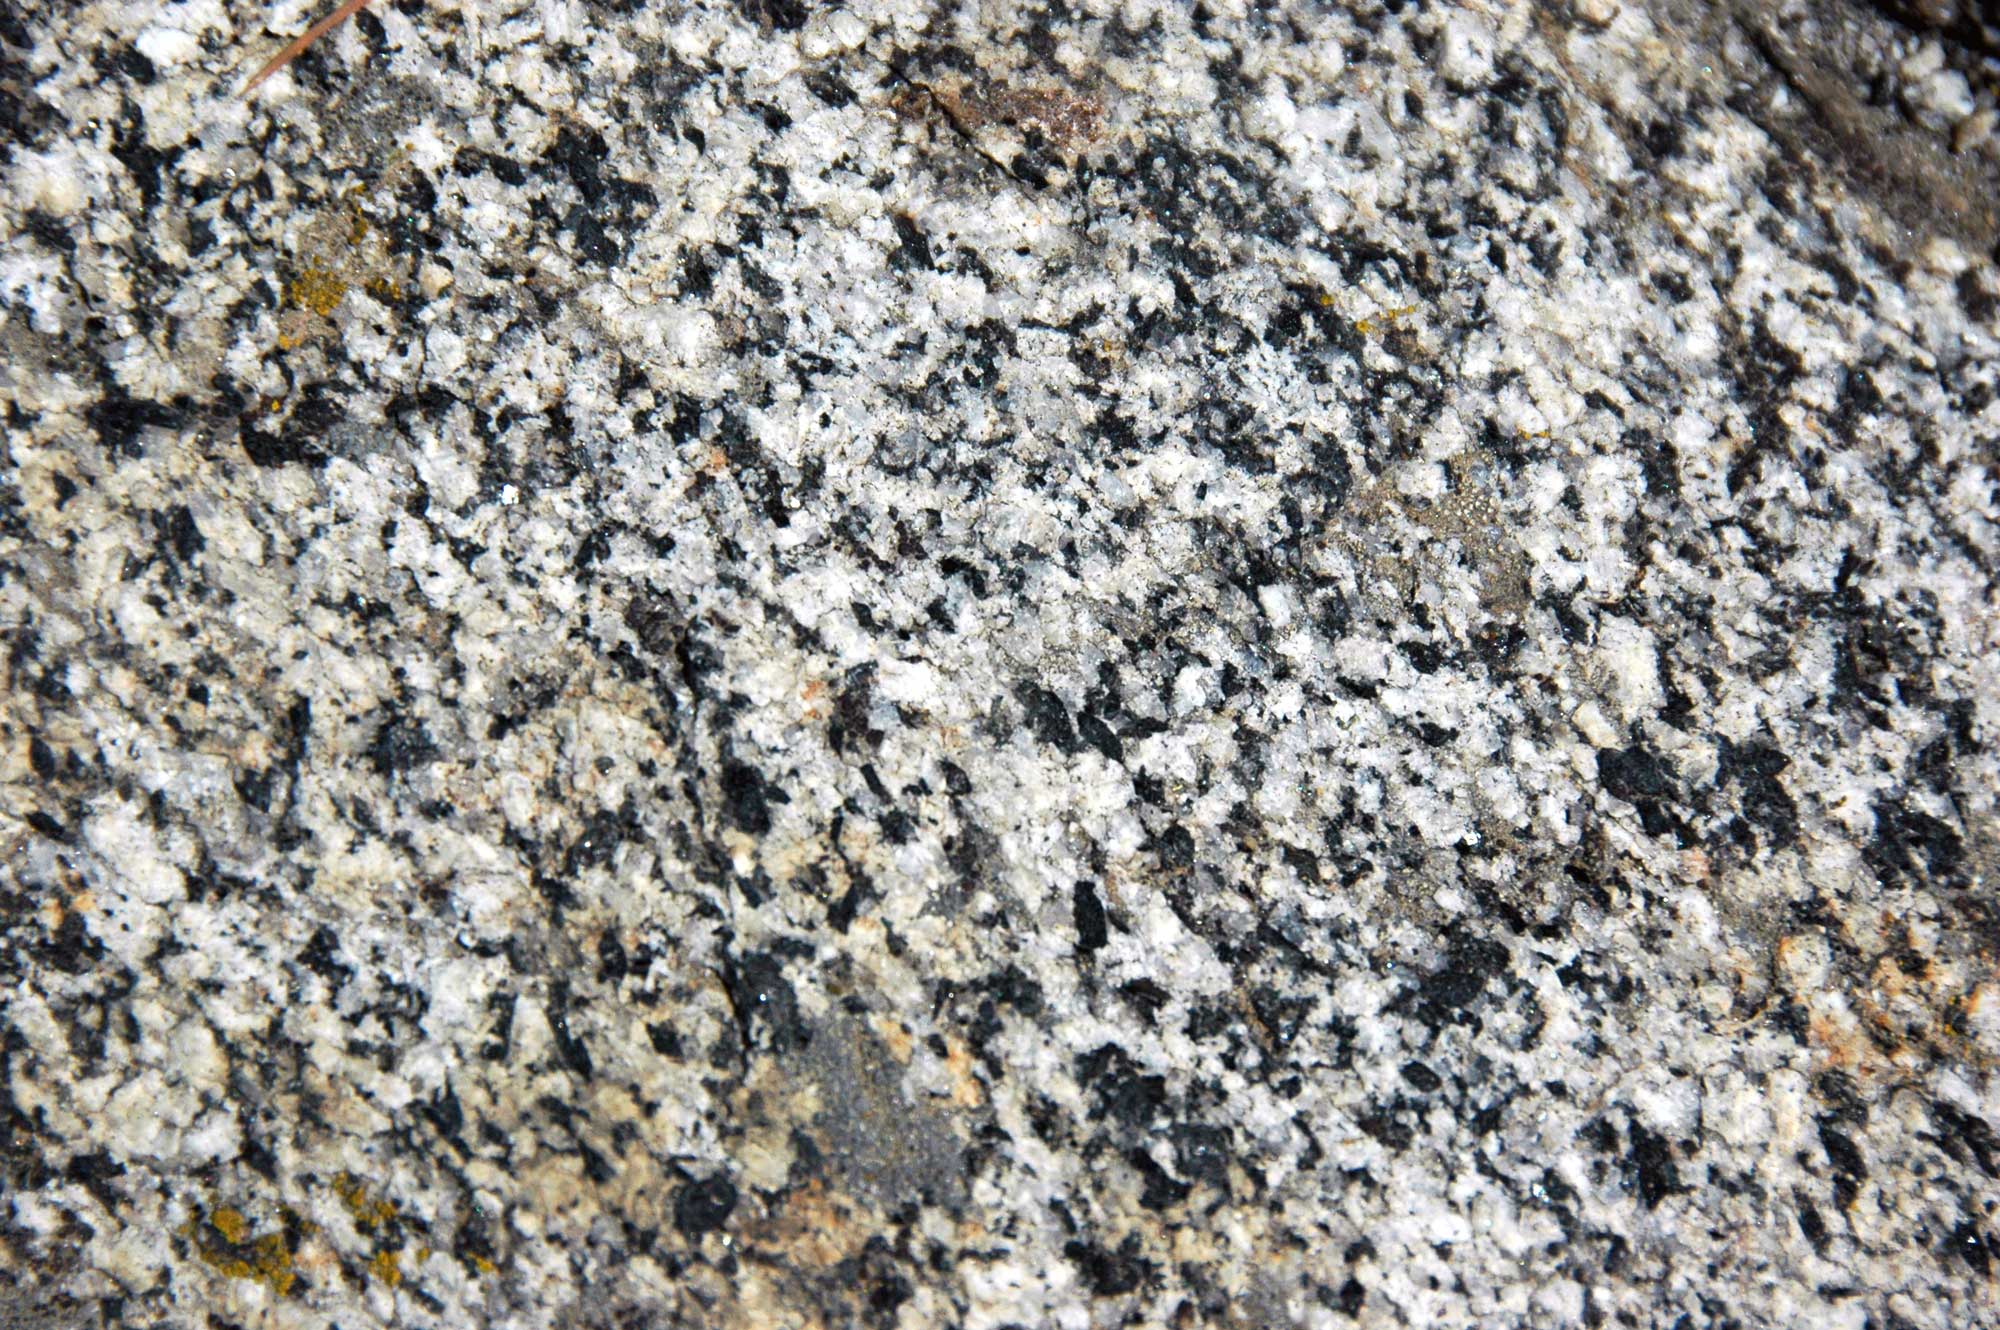 Close-up photograph of the surface of granodiorite at Sequoia National Park, California. The rock is white with large place flecks.